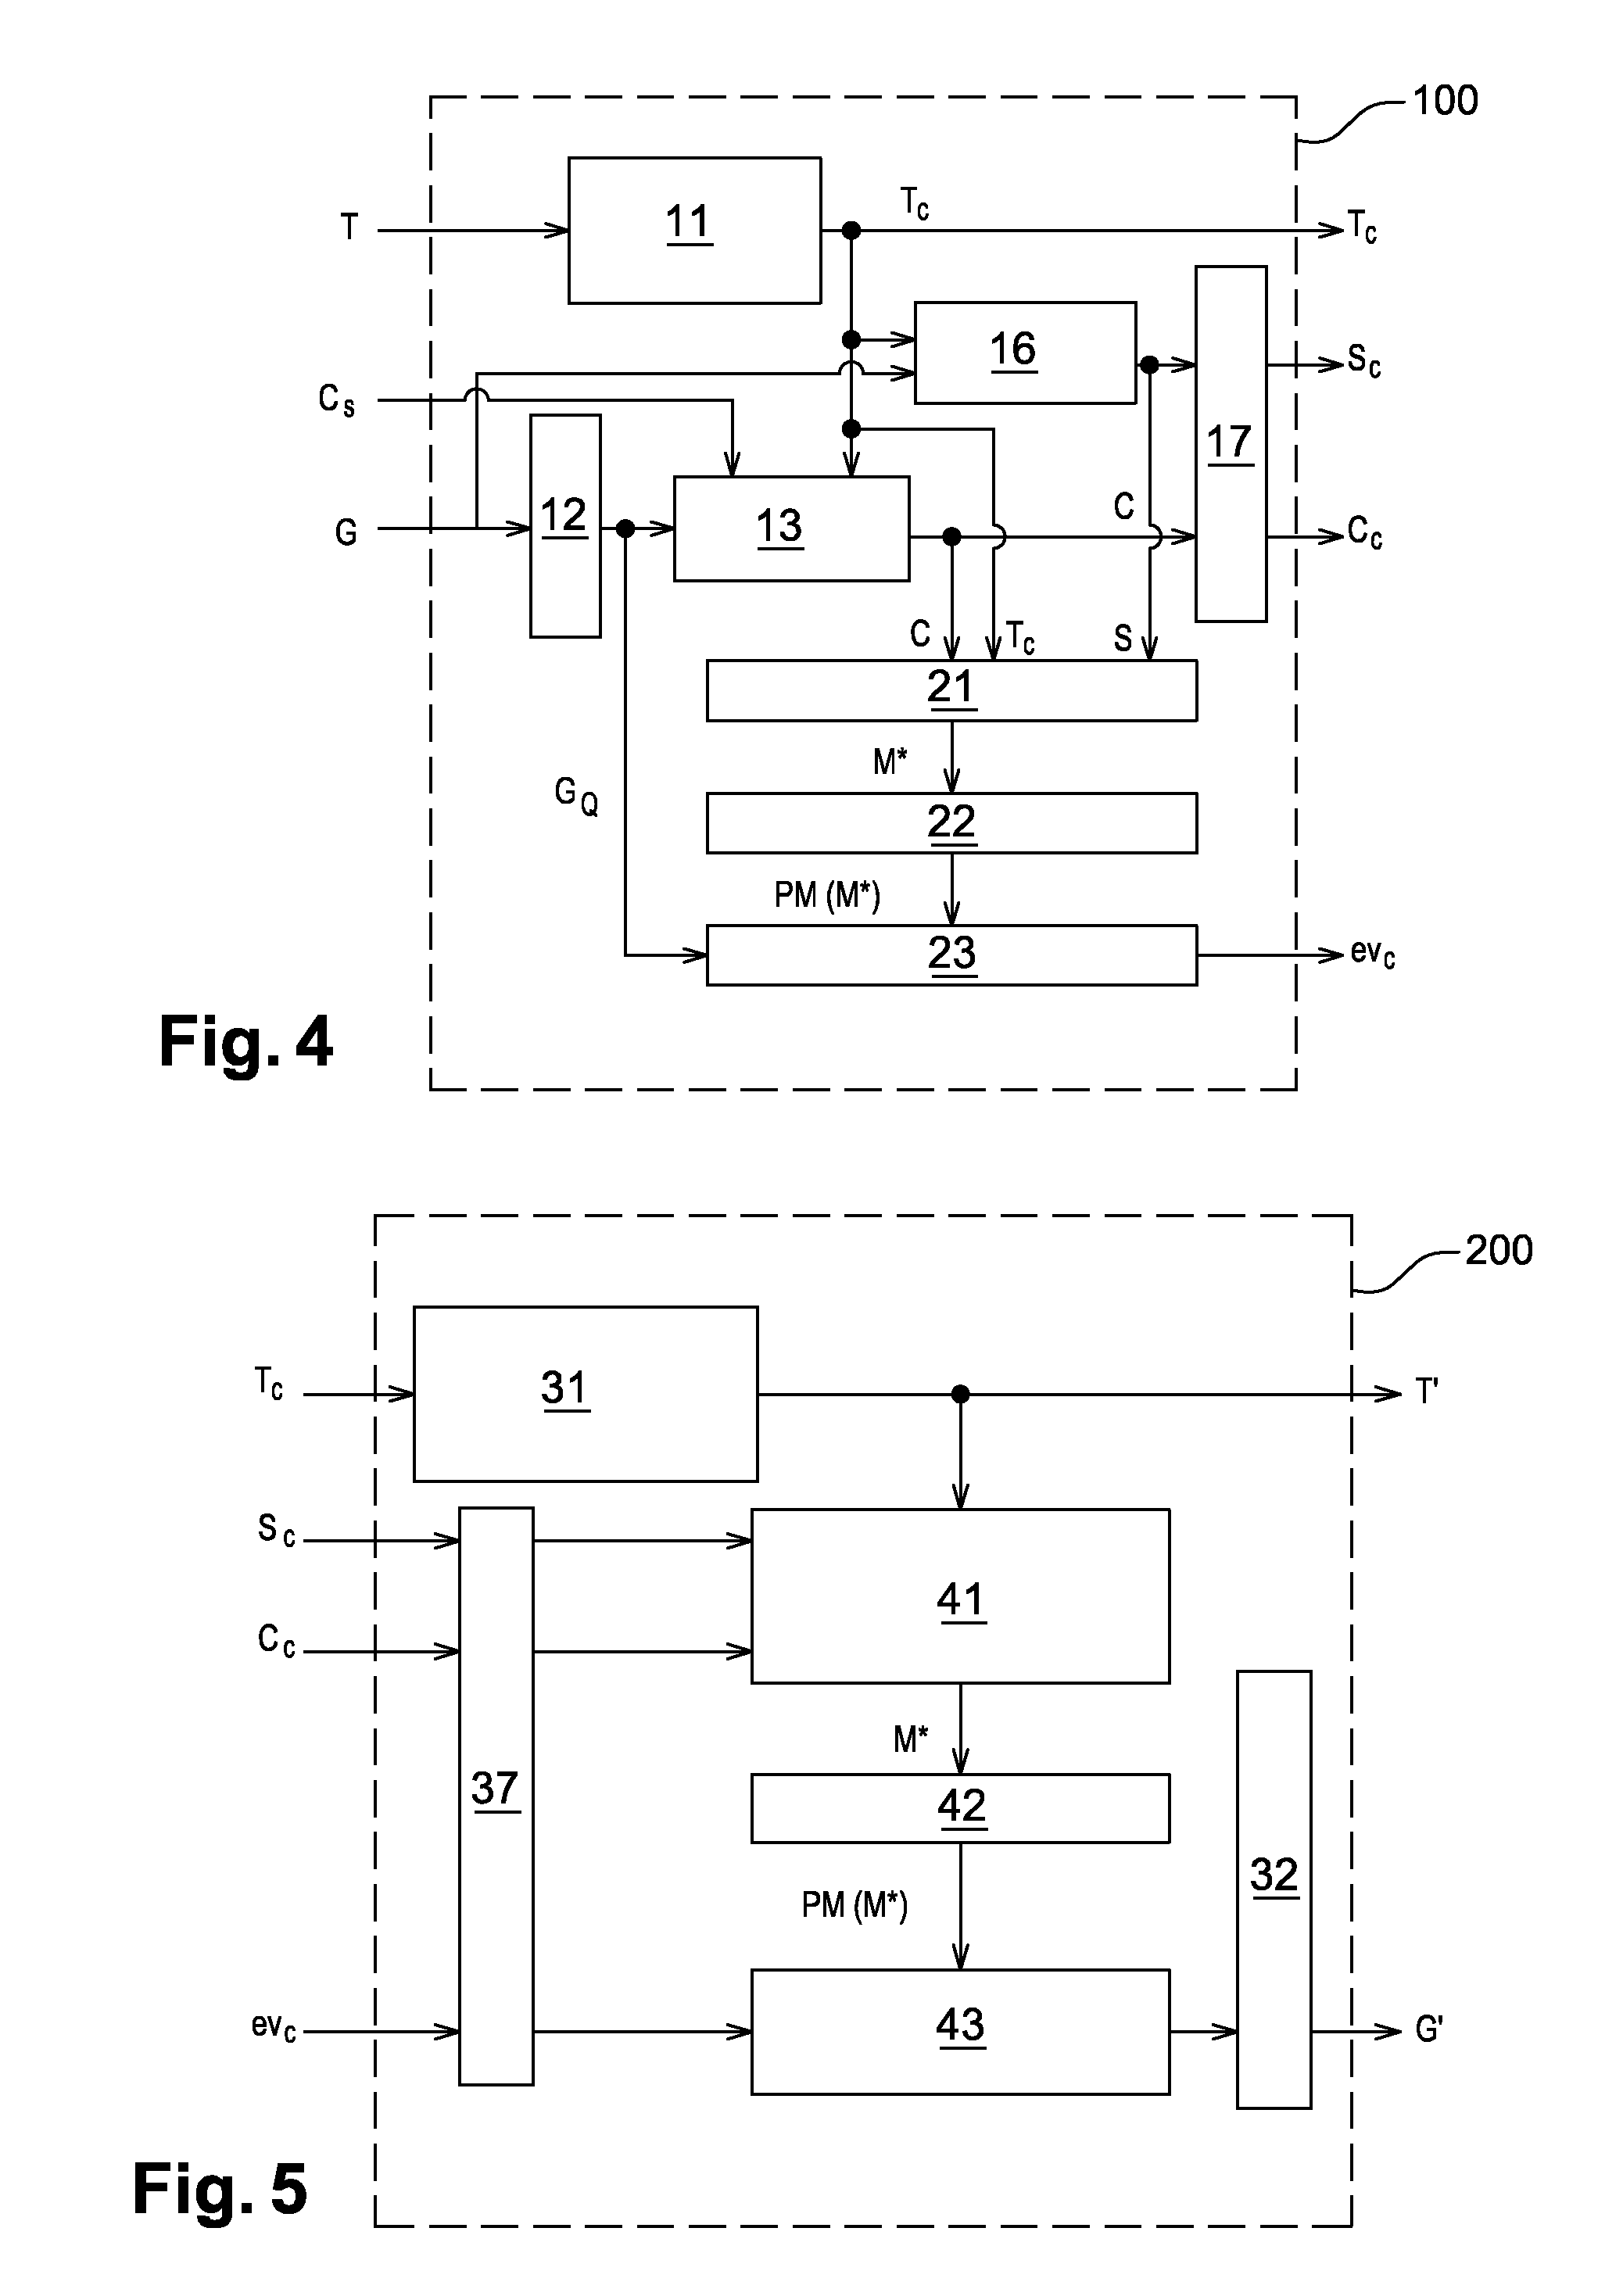 Method for compressing/decompressing a three-dimensional mesh